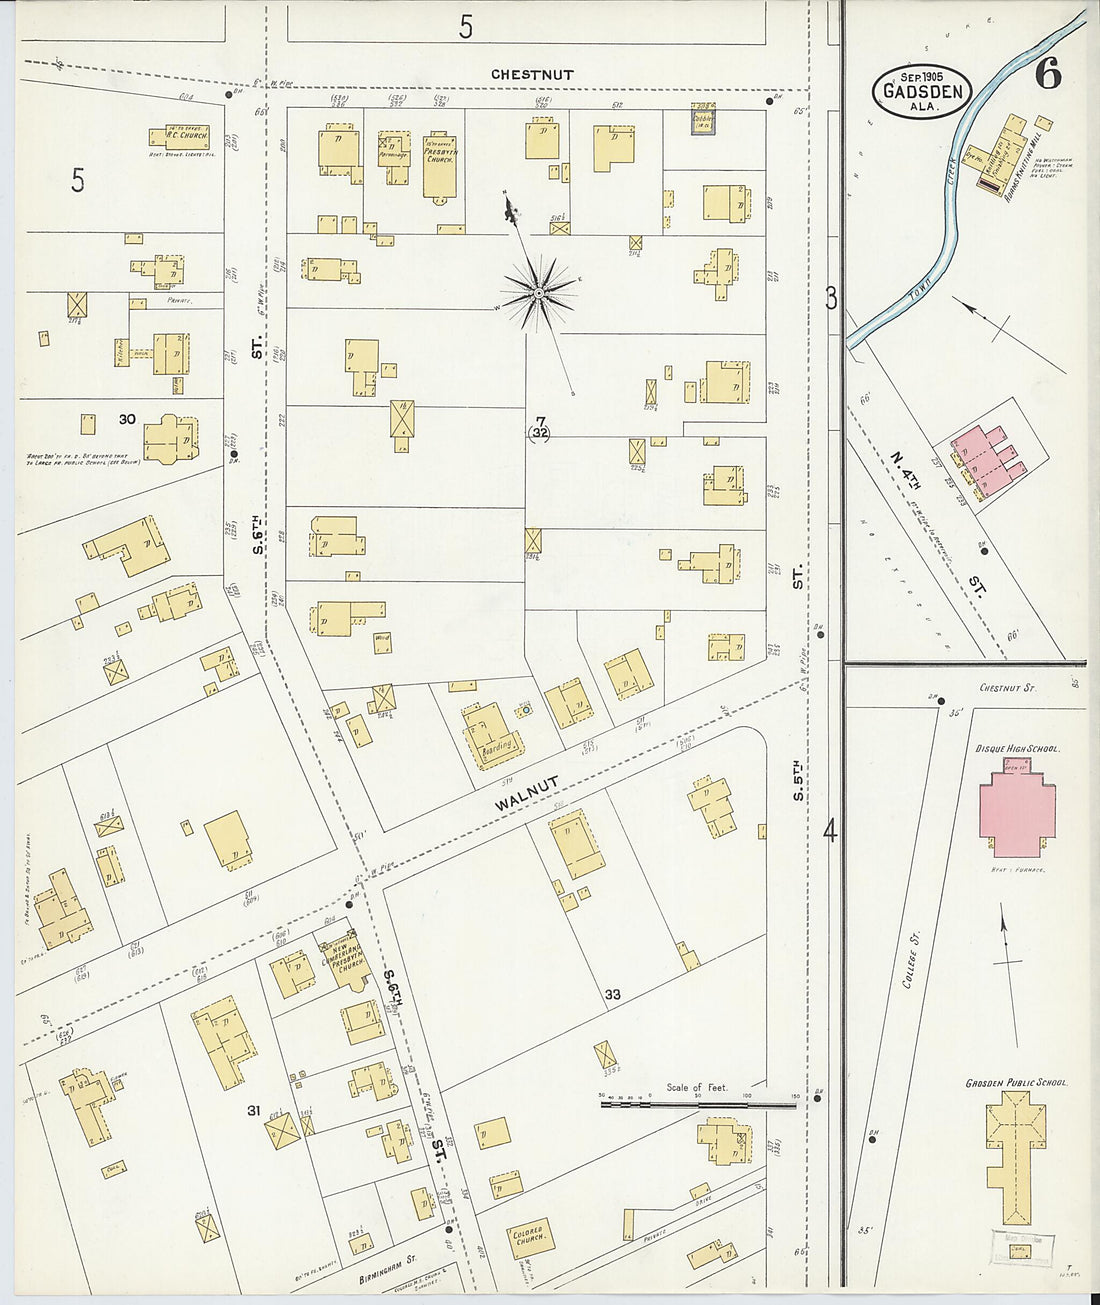 This old map of Gadsden, Etowah County, Alabama was created by Sanborn Map Company in 1905